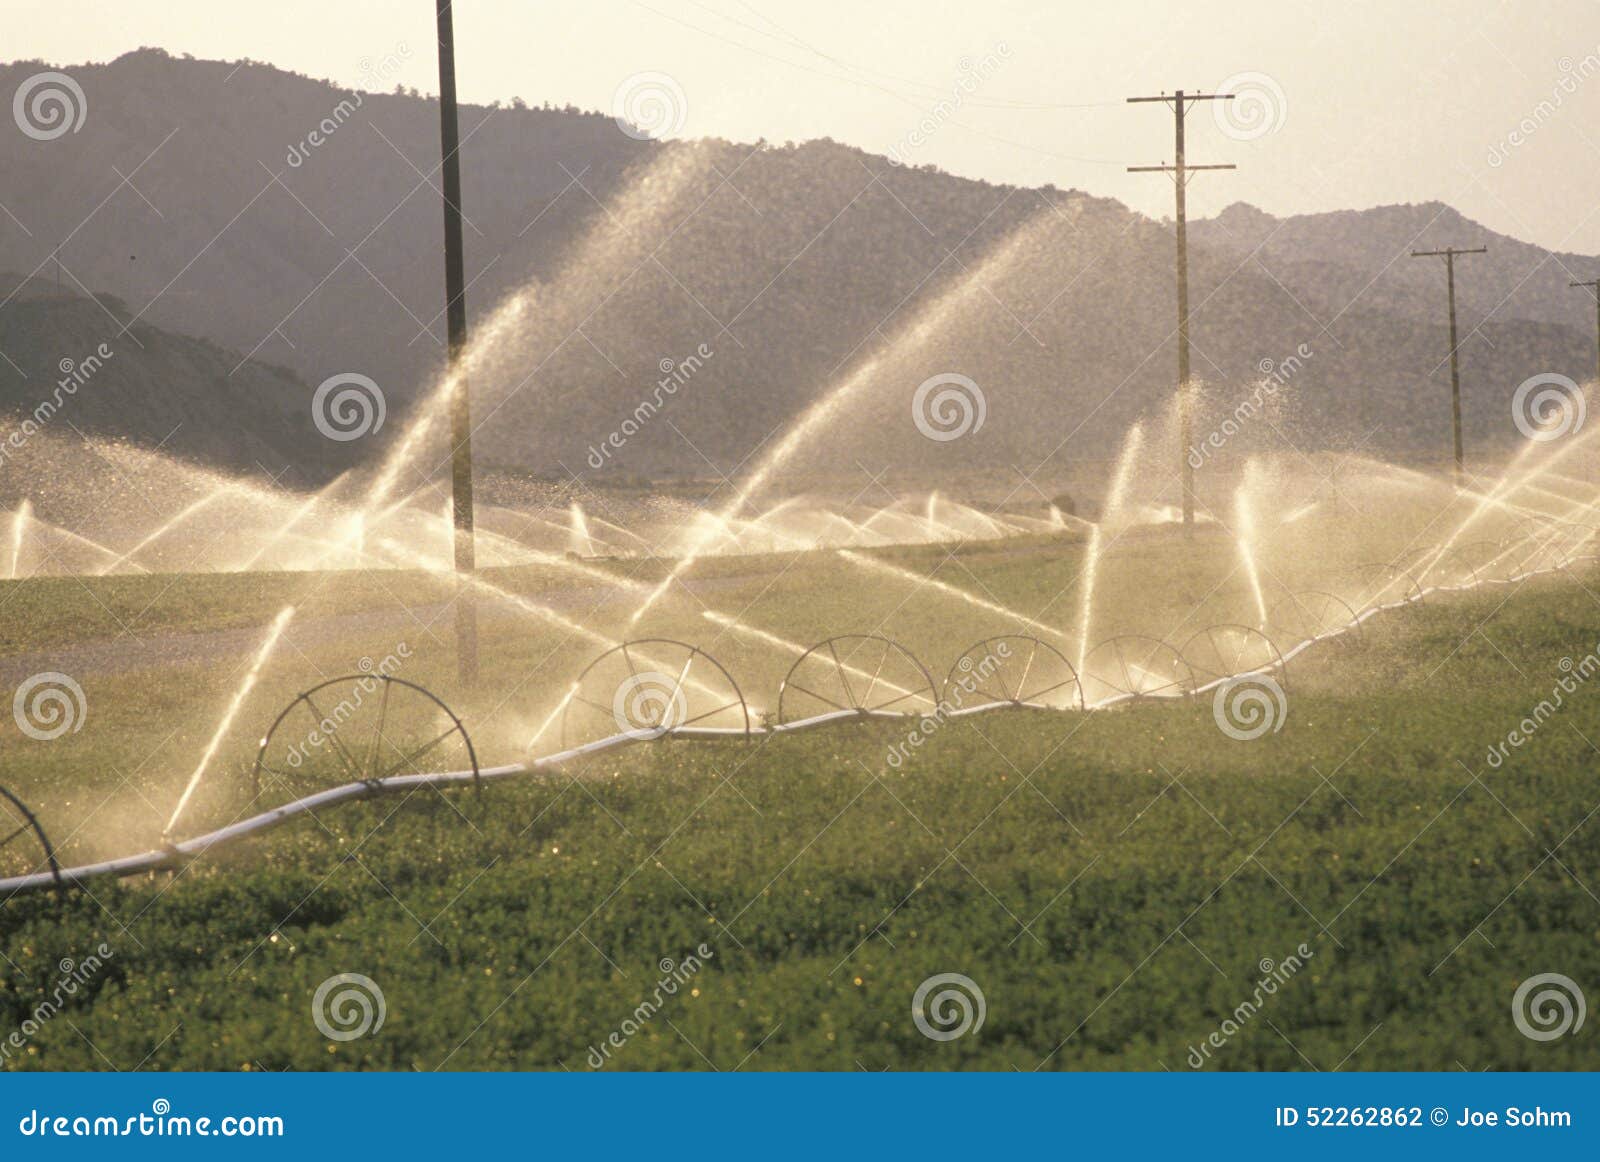 irrigation system in the san joaquin valley, ca